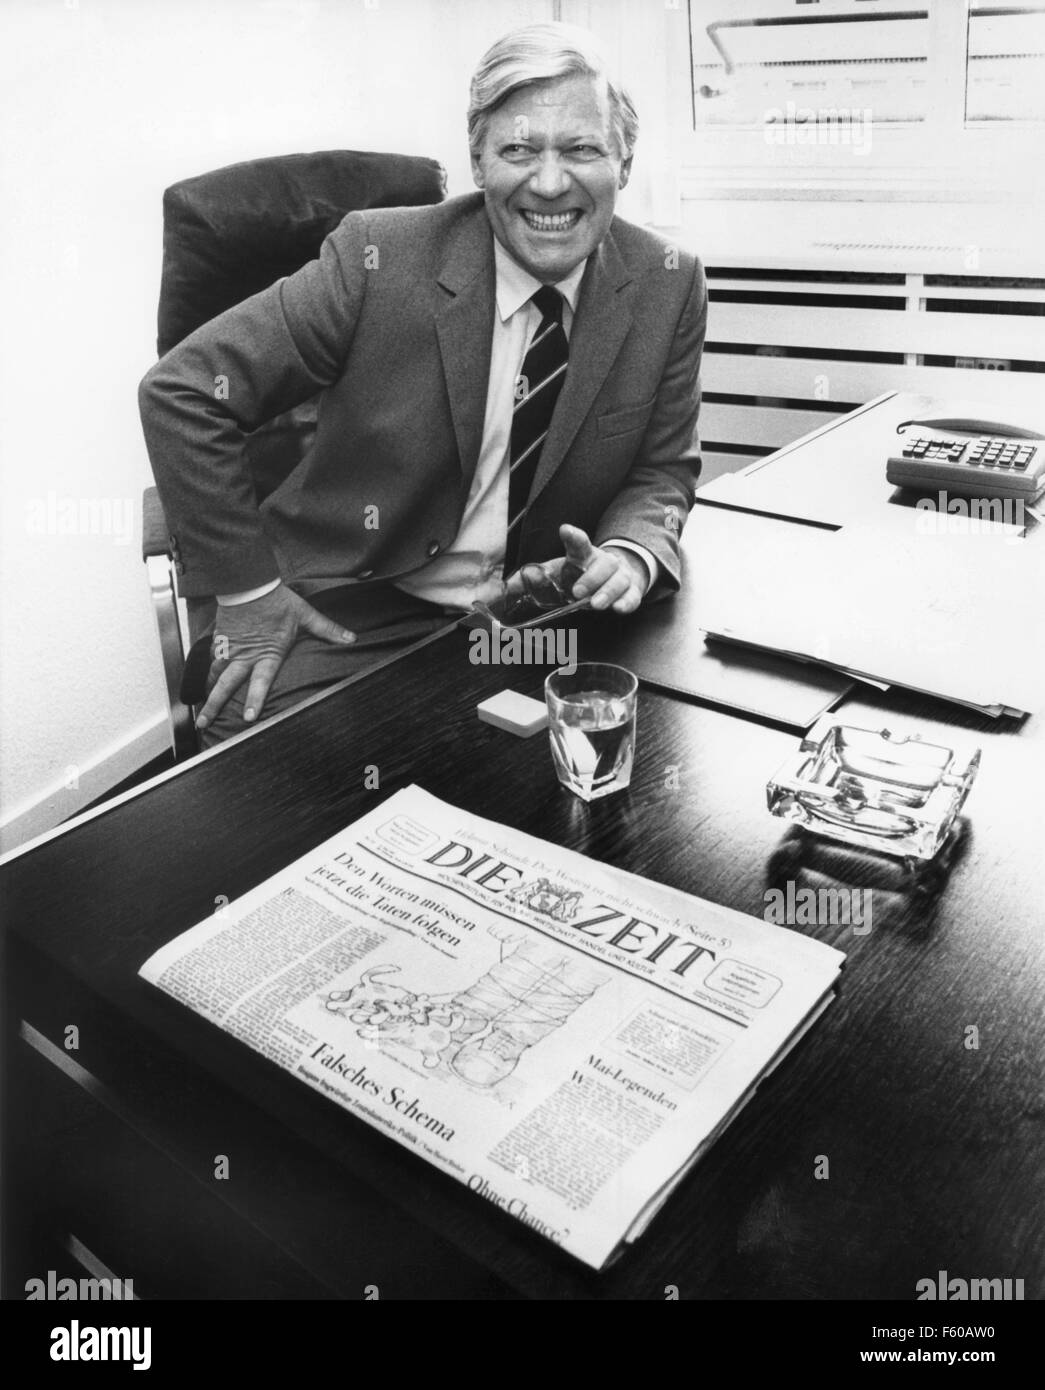 Former Chancellor Helmut Schmidt, new co-editor of "Die Zeit" newspaper, at his office at Hamburg Pressehaus on 09 May 1983. Stock Photo